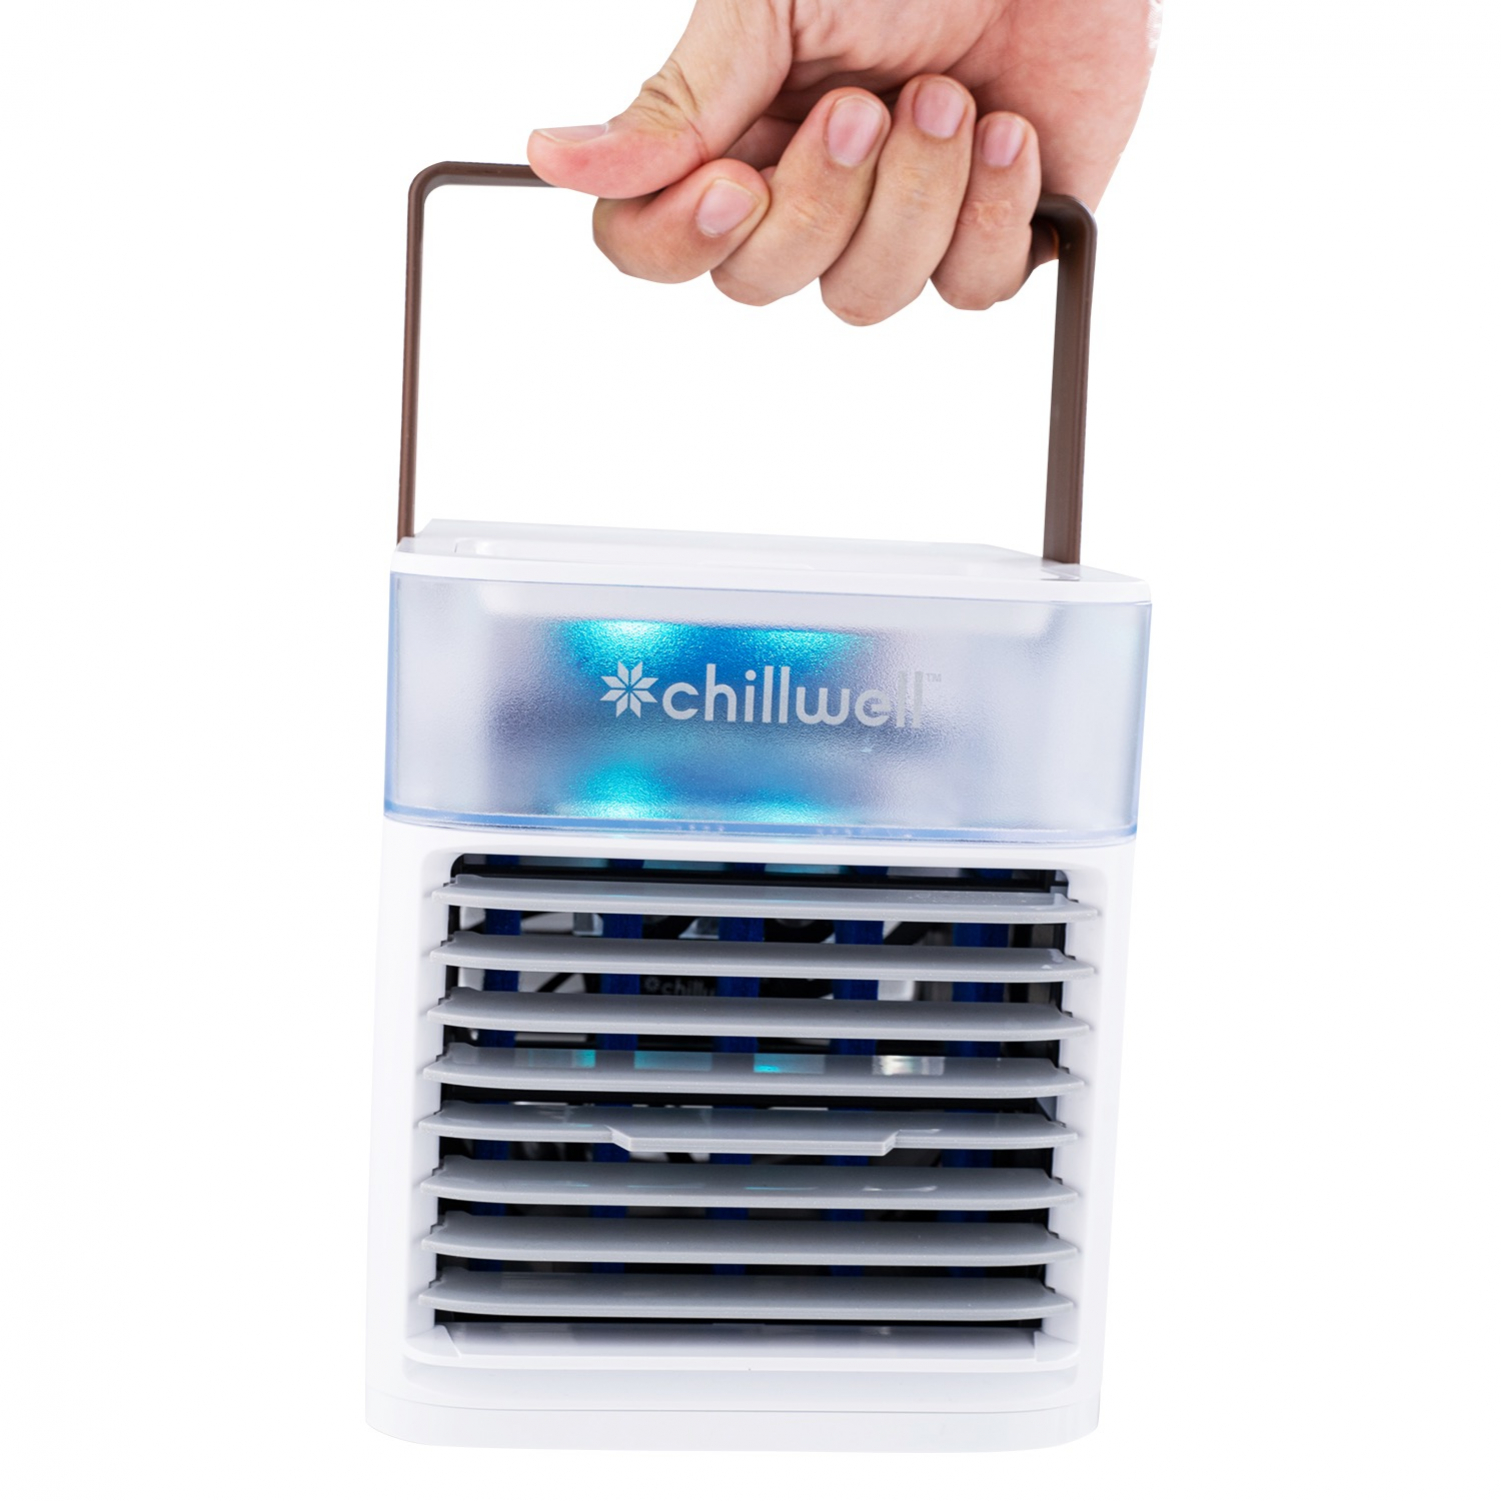 Chilwell Portable Ac Unit Reviews